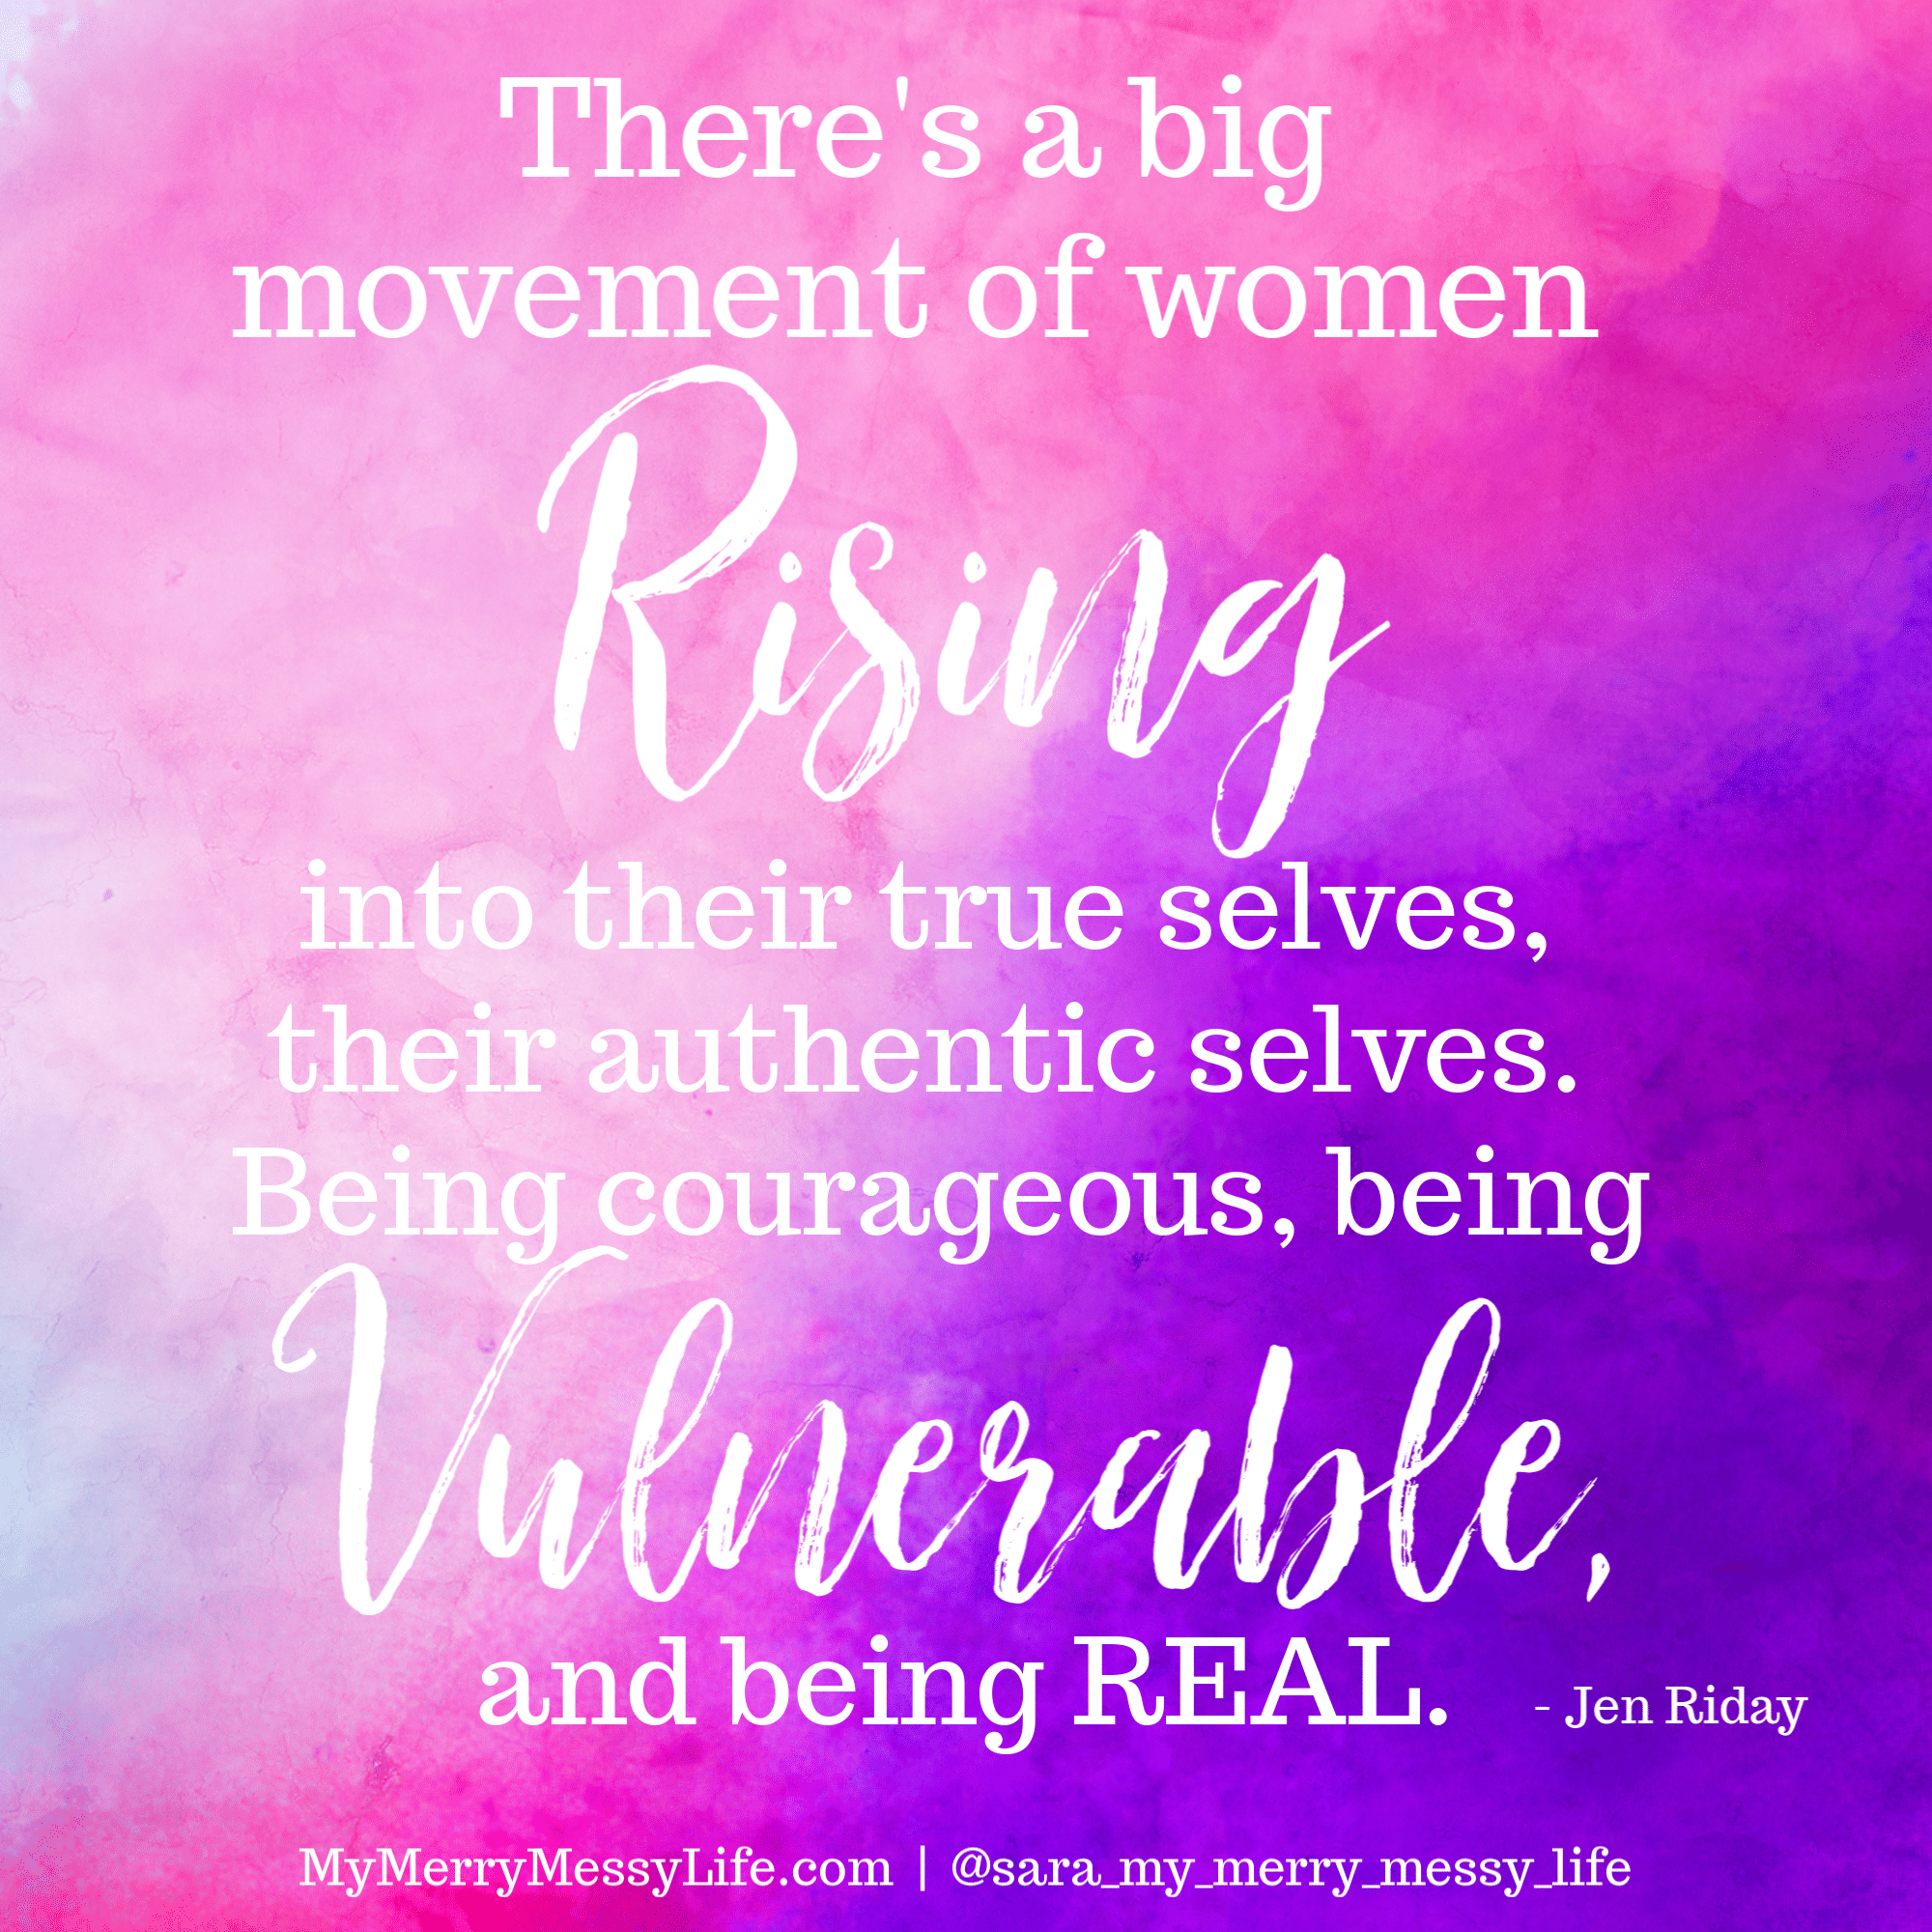 "There's a big movement right now of women RISING into their true selves, their authentic selves. Bing courageous, being vulnerable, and being REAL." Jen Riday on The Merry Messy Moms Show Podcast